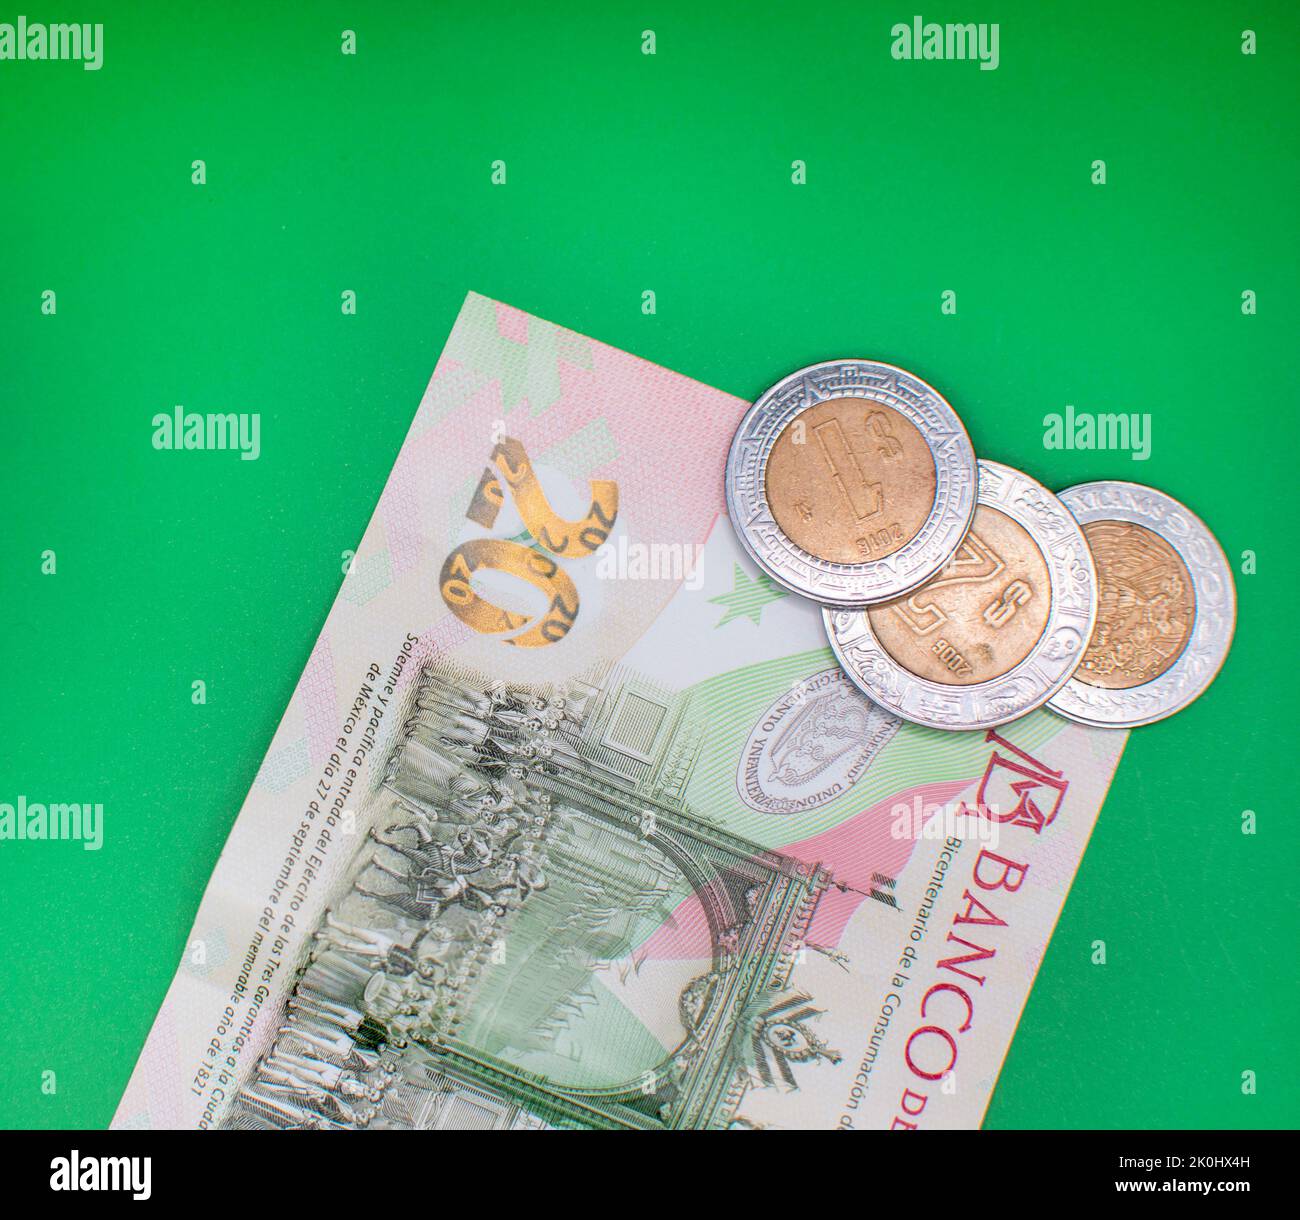 A top view of 20 Mexican peso banknote with coins on a green background Stock Photo